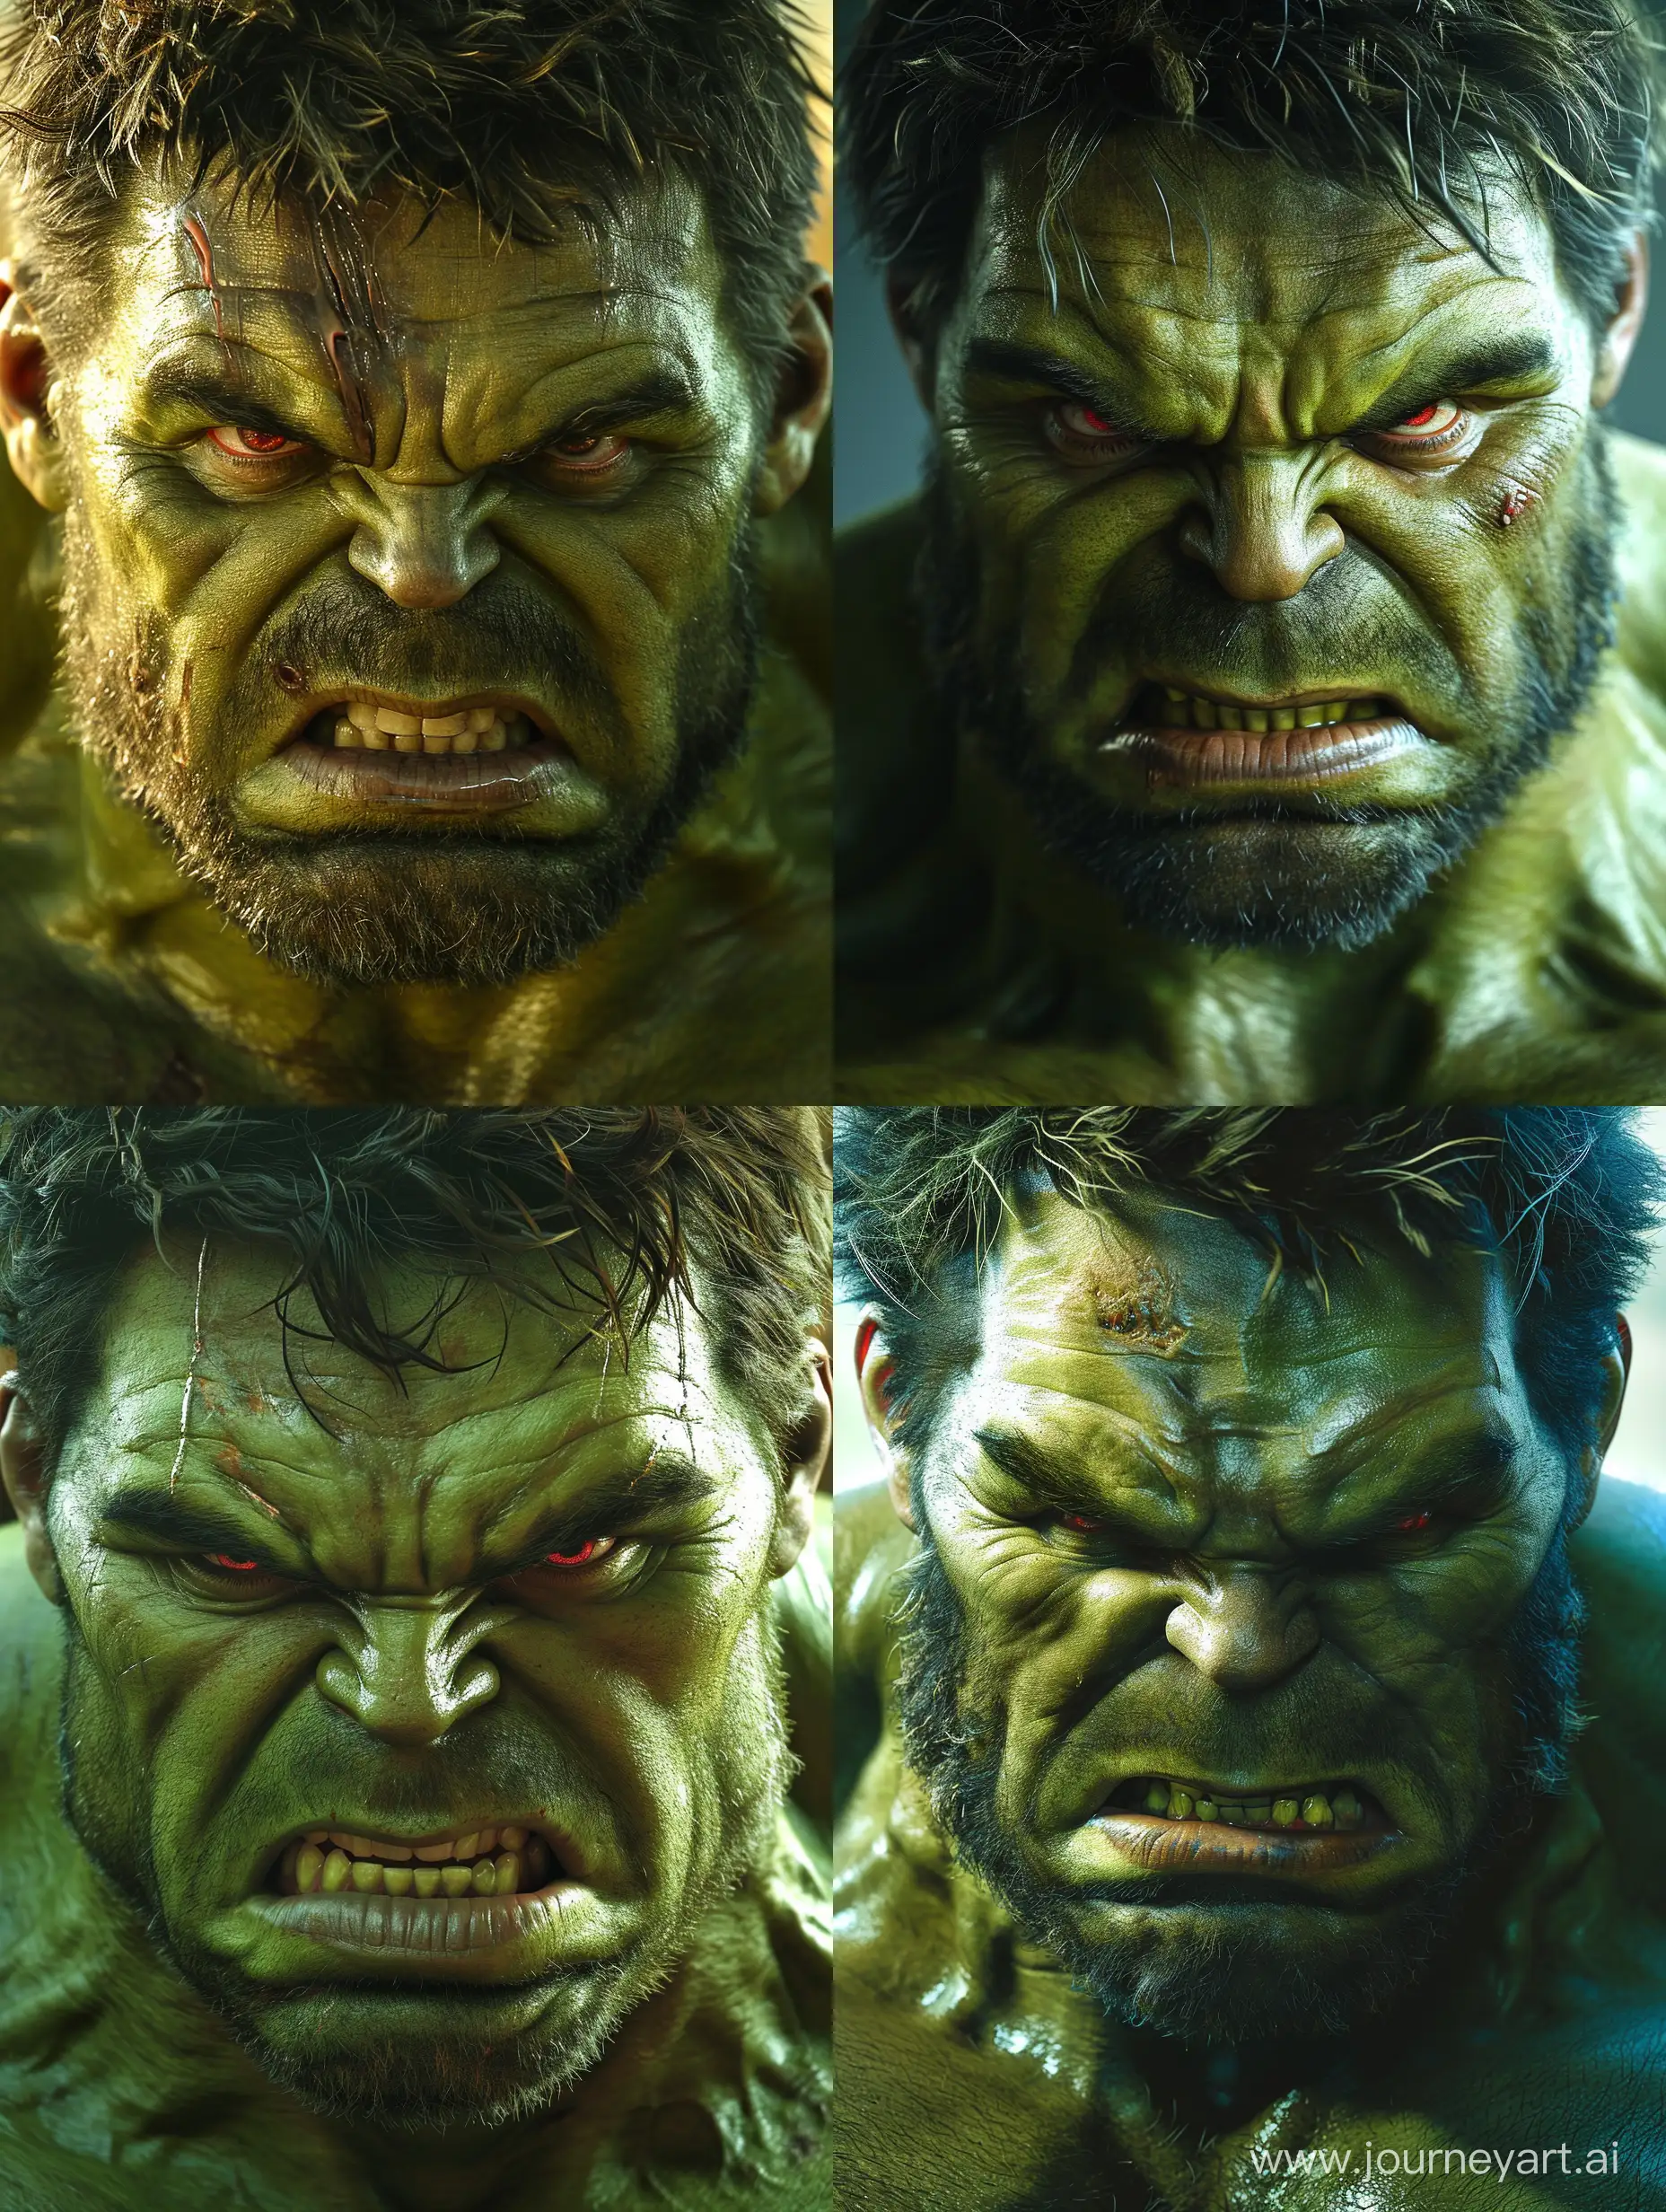 The Incredible Hulk, portrayed by Mark Ruffalo, looks angry and intense. He has a beard and his eyes are red. He has a few wrinkles around his eyes and mouth. His eyebrows are bushy and his forehead is covered in wrinkles. He has a few strands of hair on his forehead and a full head of hair on his head. He has large muscles and his skin is green.